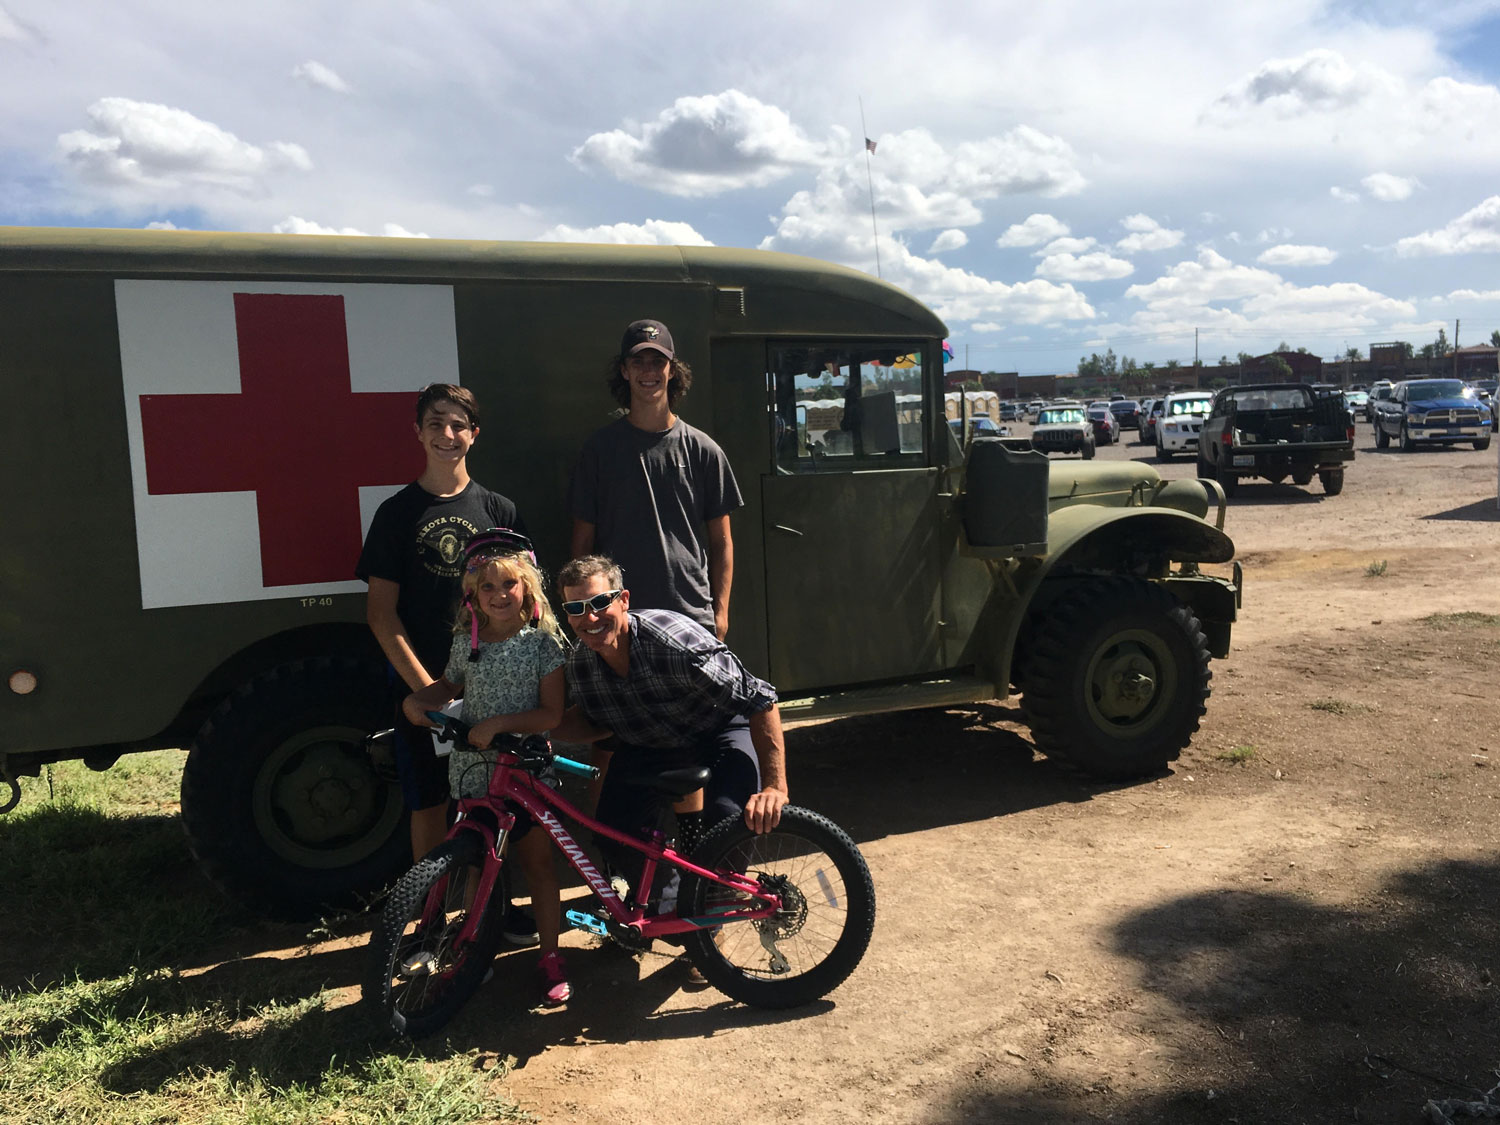 Jared Fisher standing with family in front of a military truck